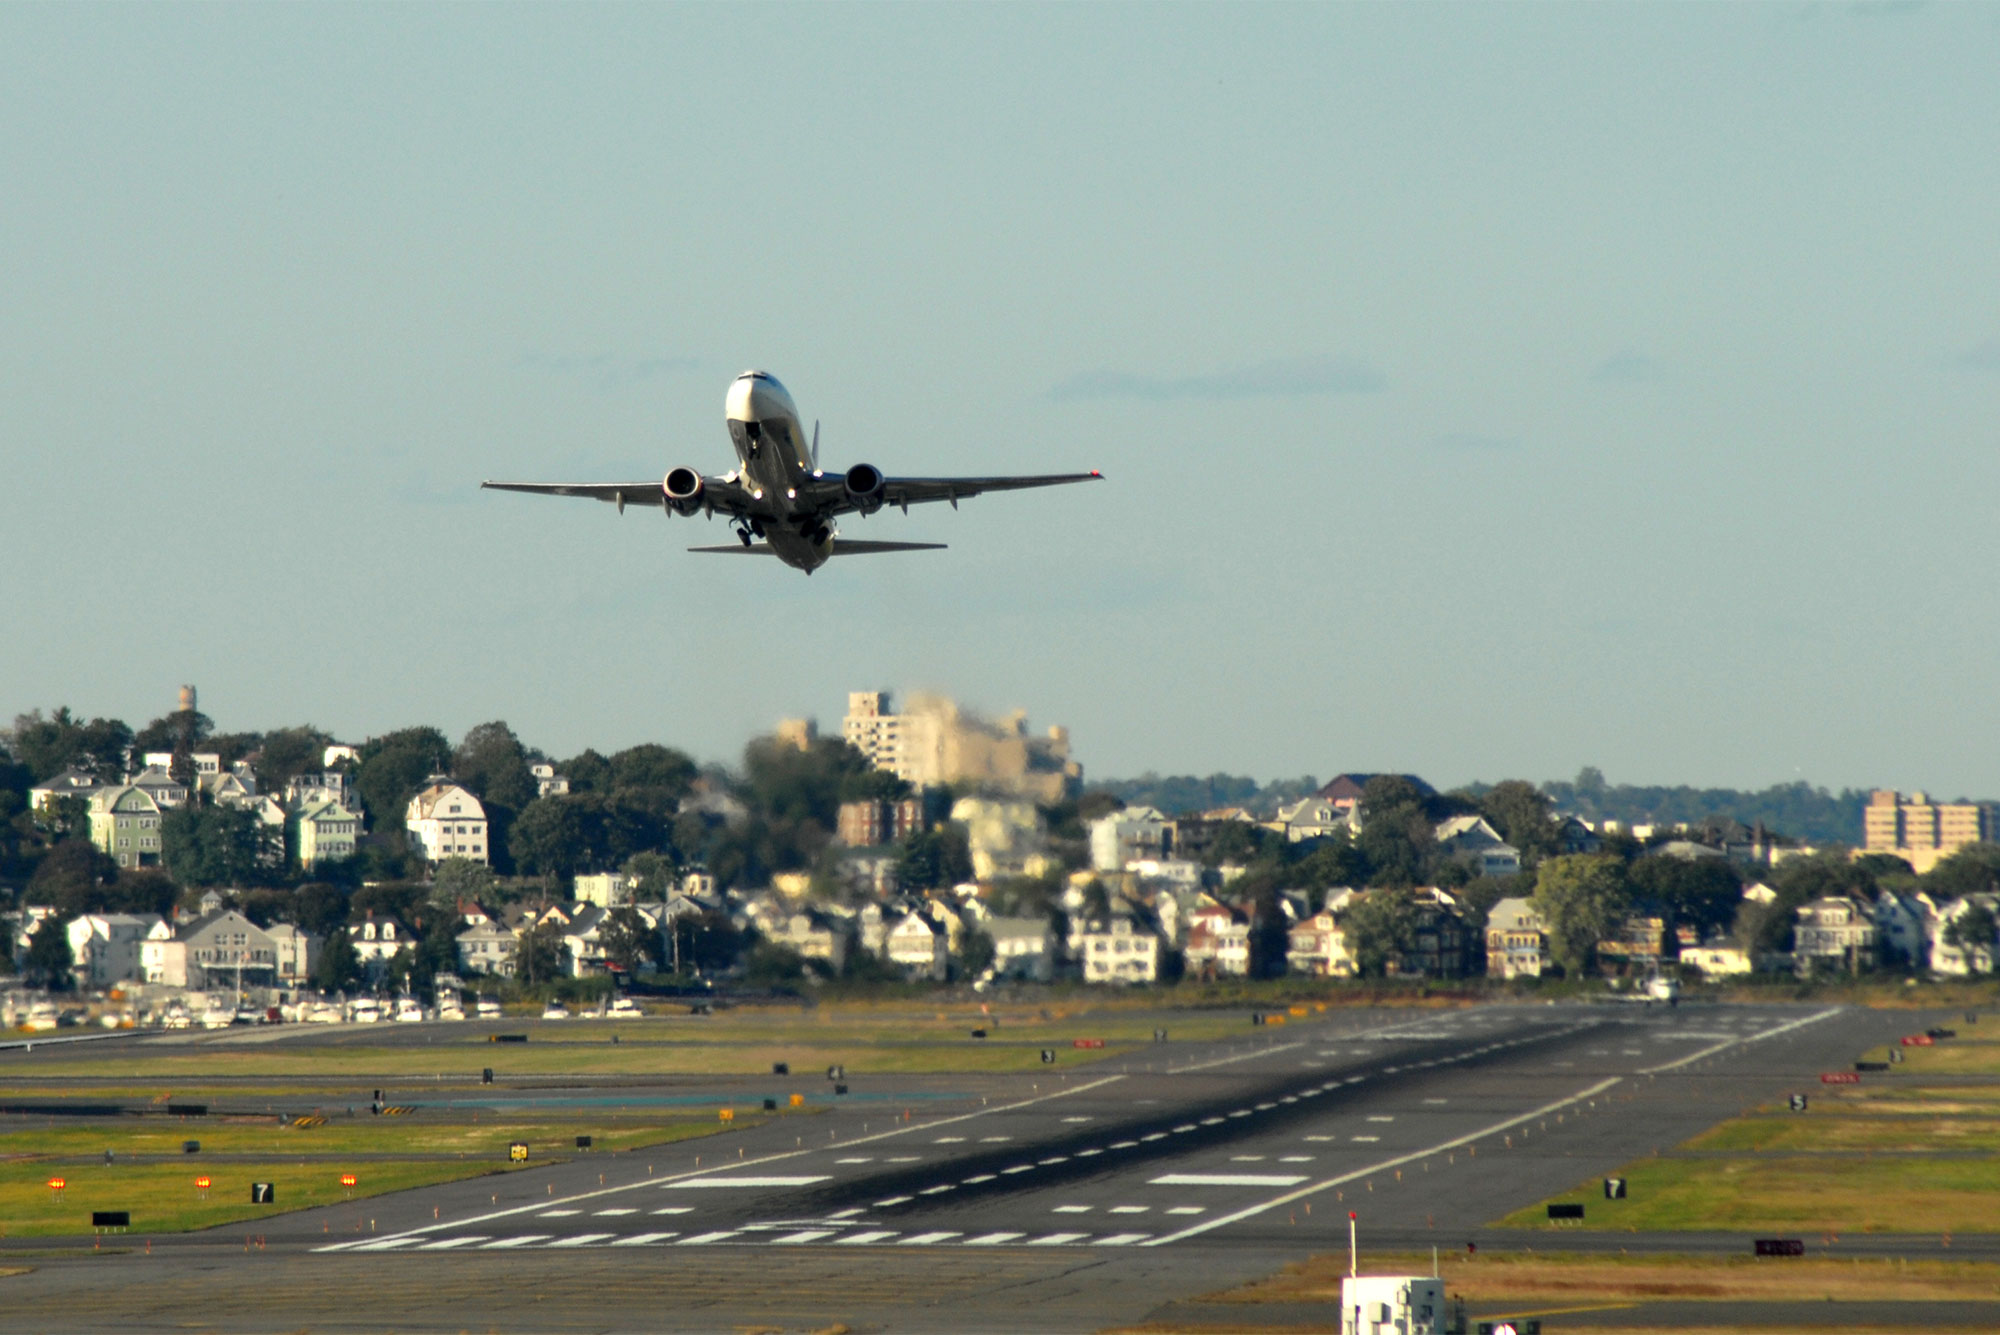 An airplane takes off from Logan International Airport in Boston with a local community visible in the background.